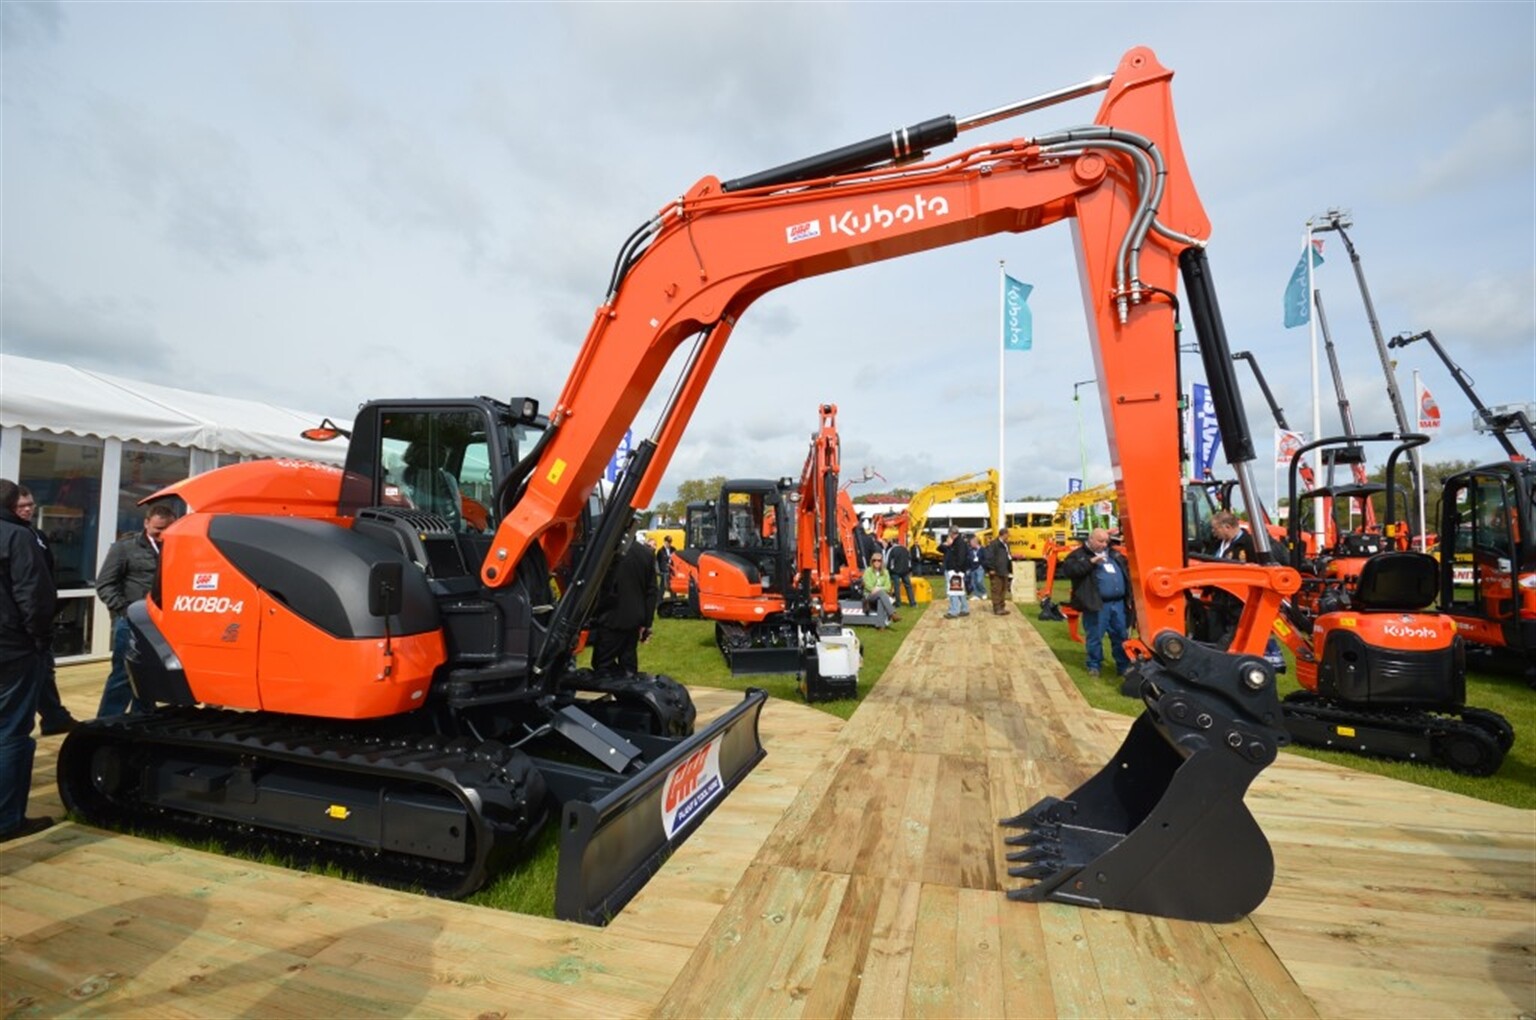 Sunshine, showers, and lots of kit on day one of Plantworx